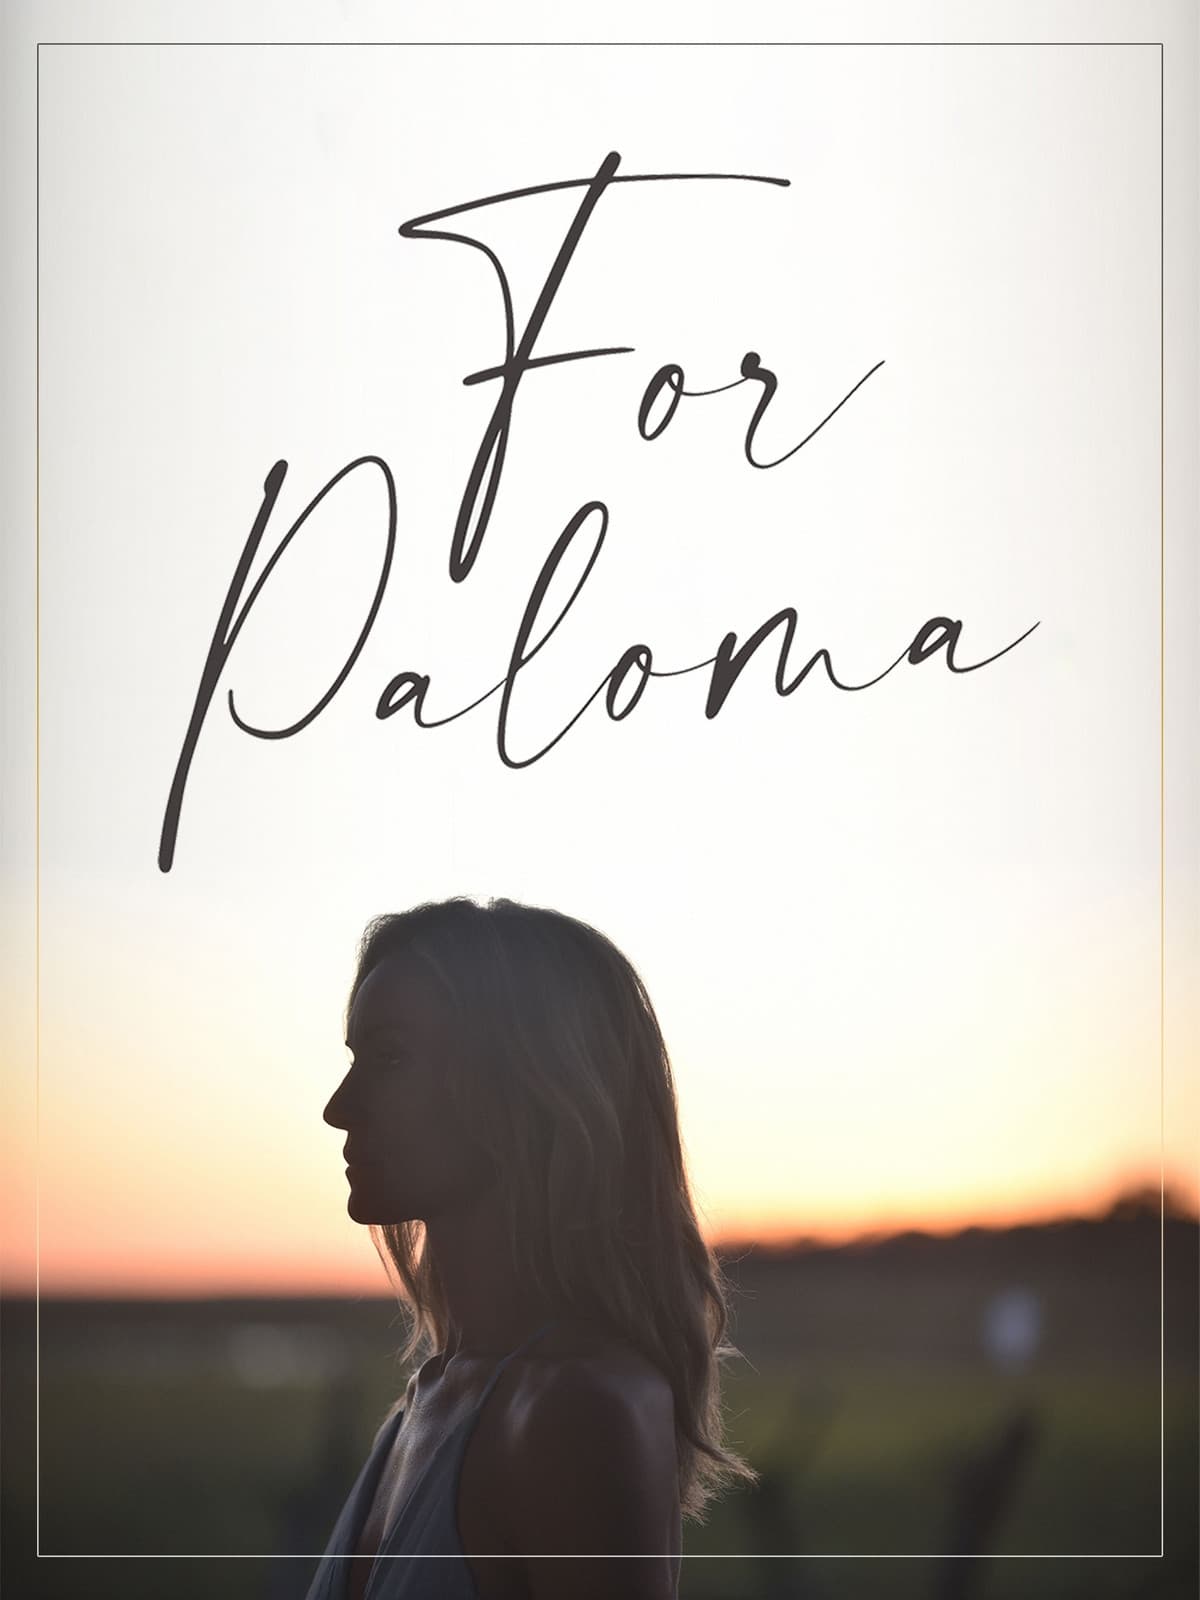 For Paloma